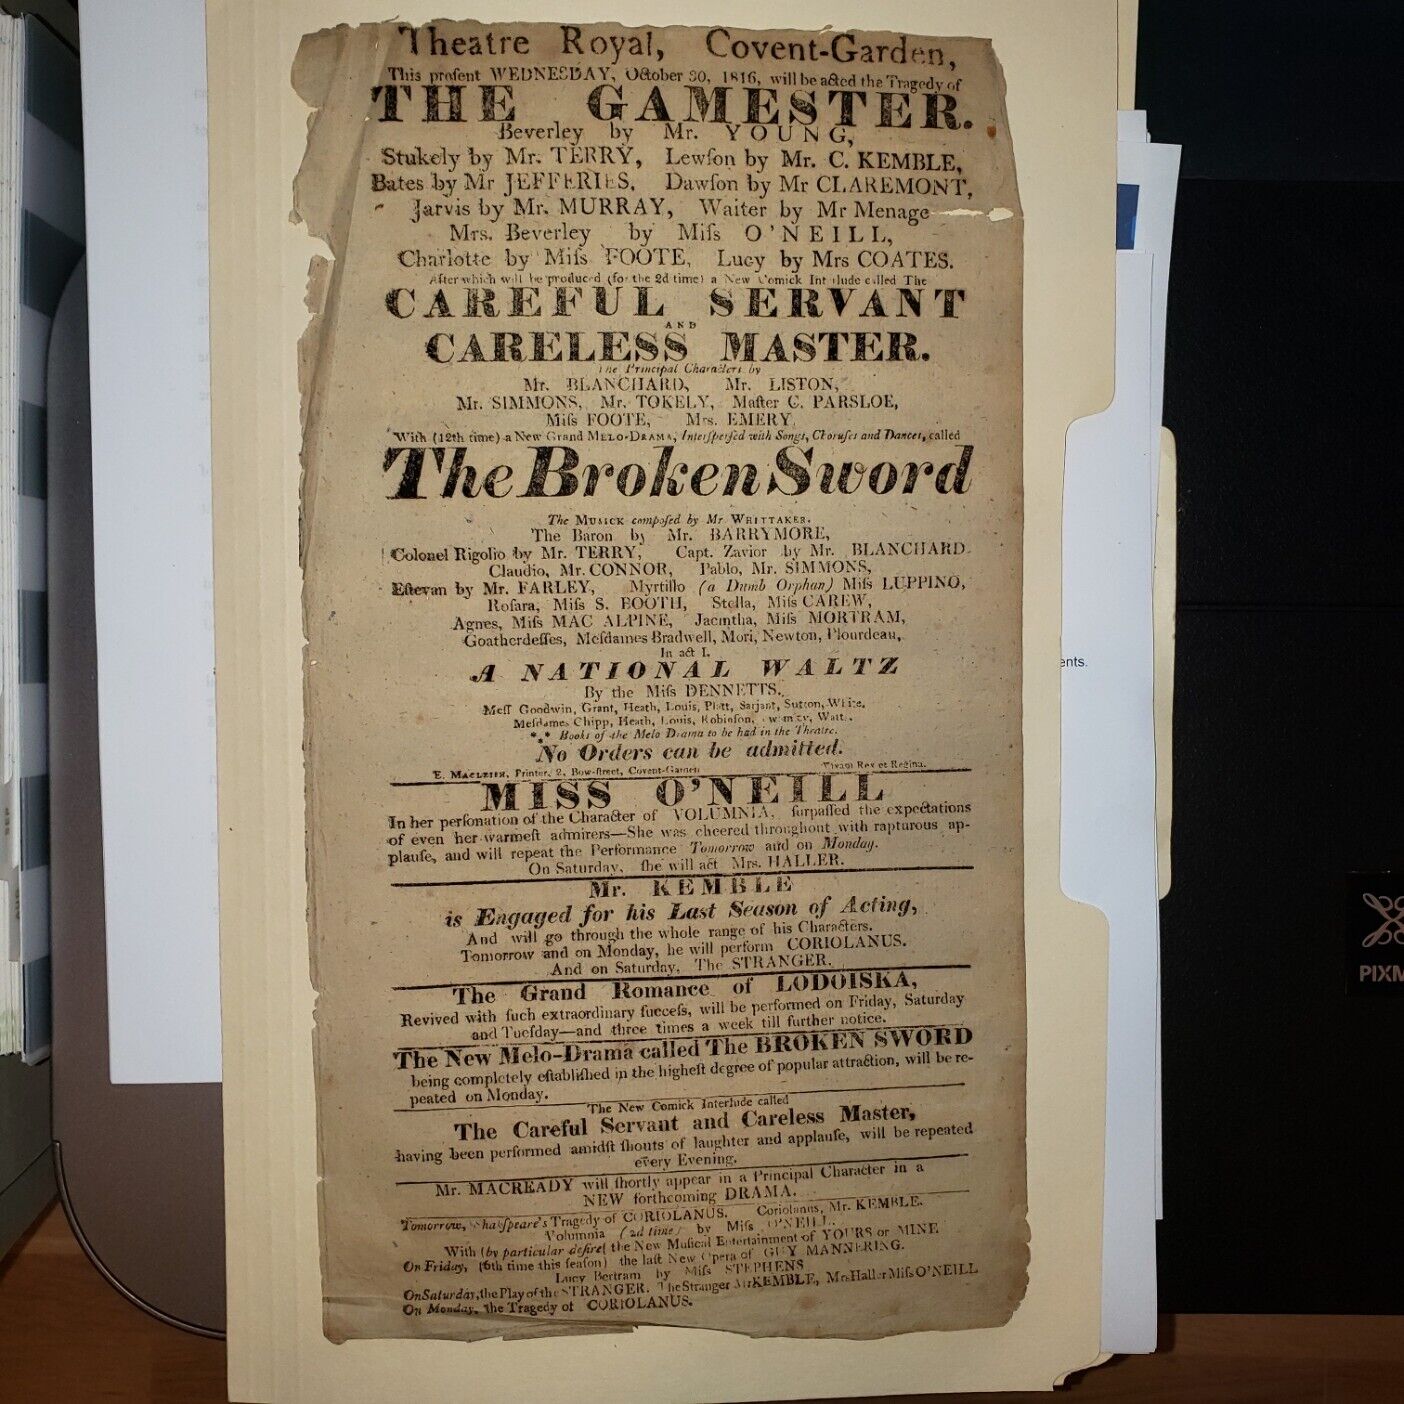 Play bill - Royal Theatre - The Gamester, 1816